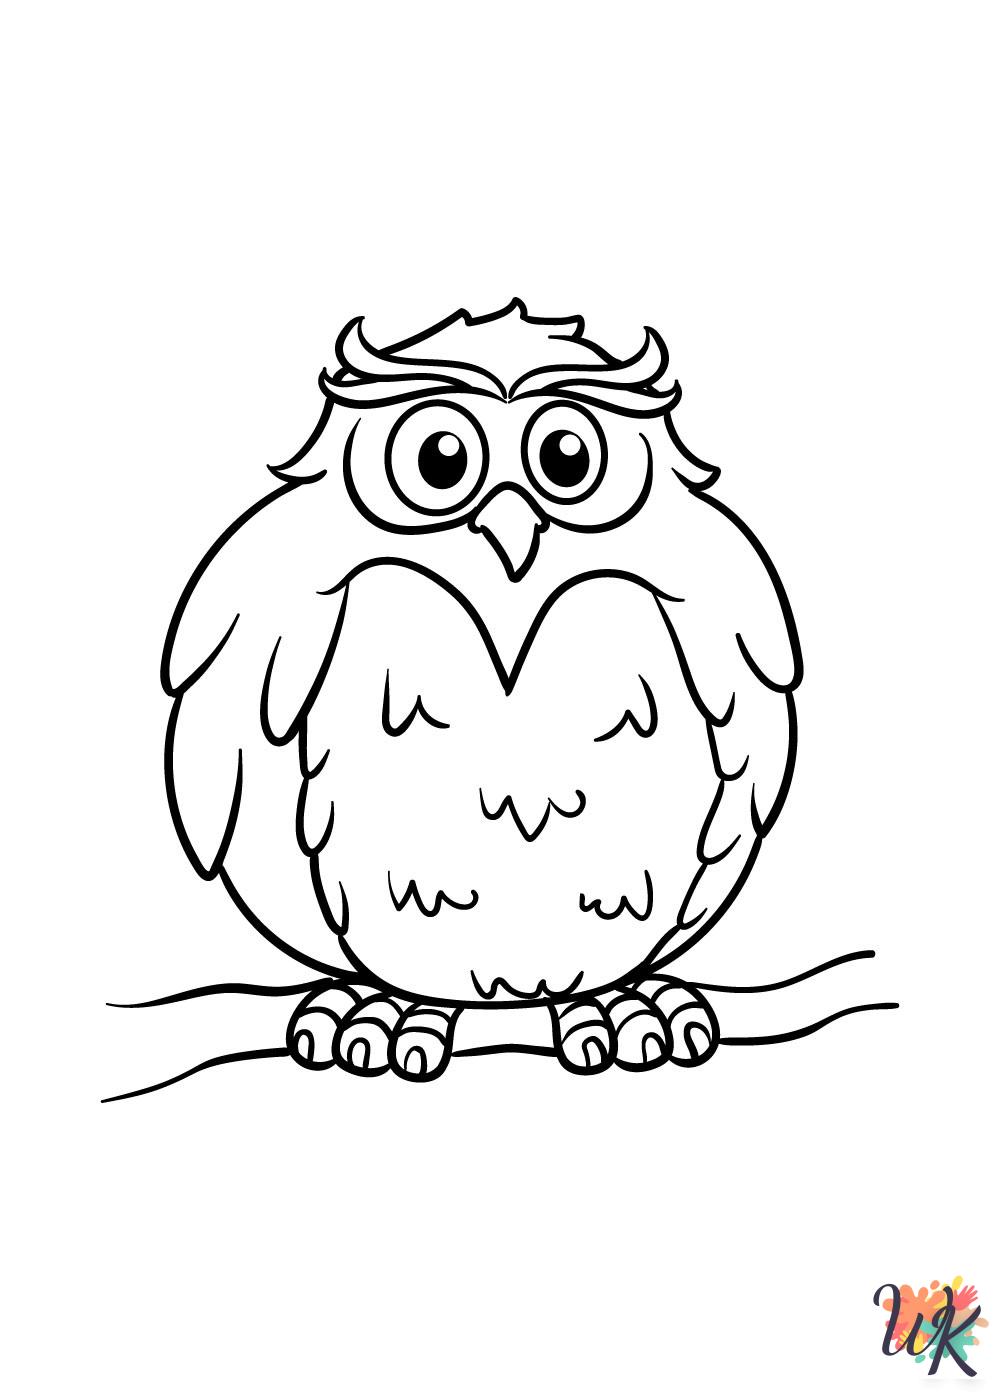 Owl coloring pages free 1